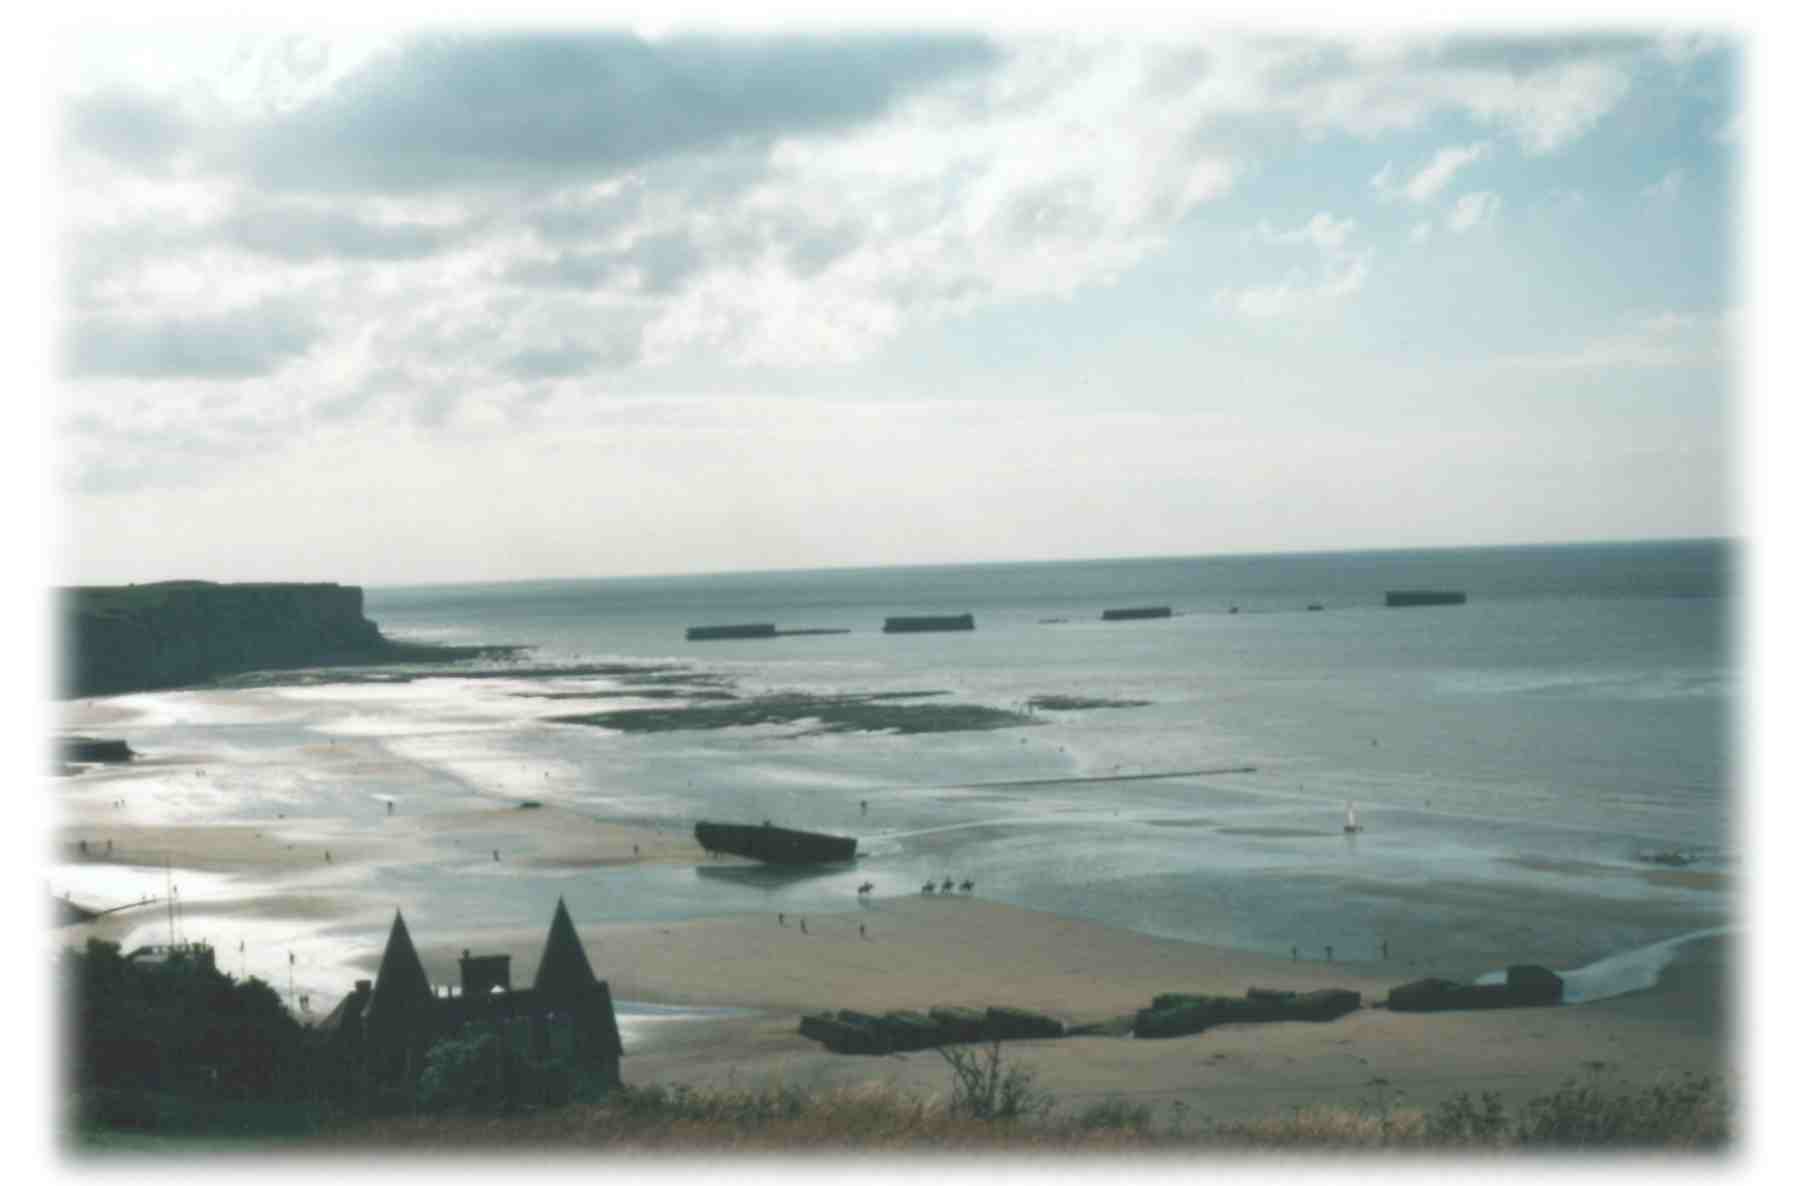 Arromanches and parts of the Mulberry Harbour